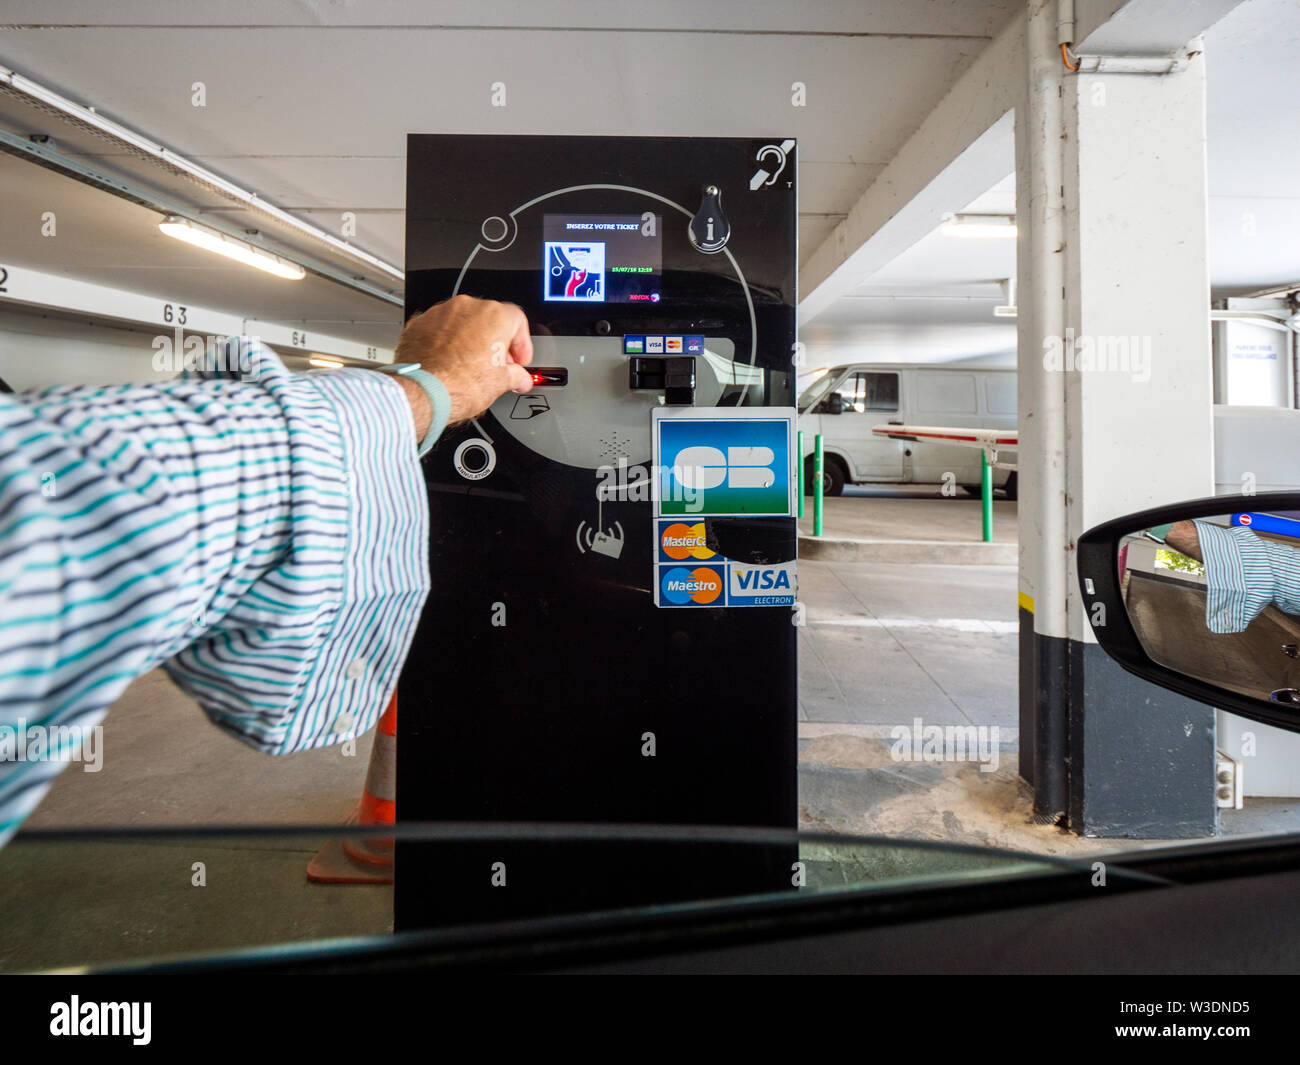 Basel, Switzerland - Jun 5, 2018: man hand inserting ticket in side the  barrier ticket machine to exit French parking lot Stock Photo - Alamy